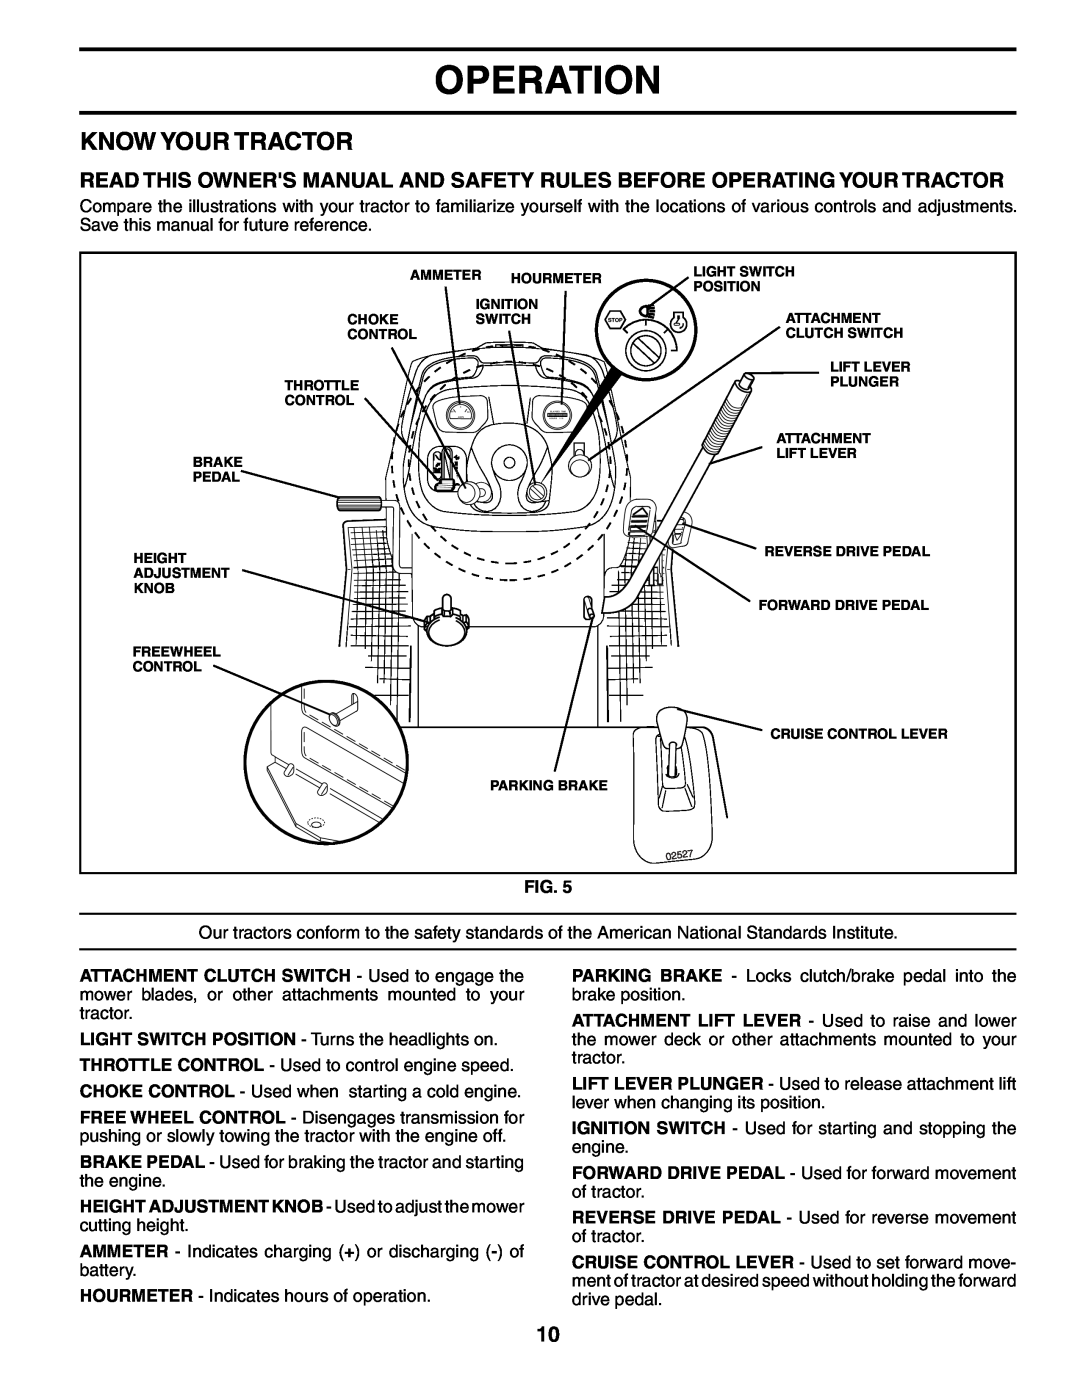 Husqvarna YTH1542XP owner manual Know Your Tractor, Operation 